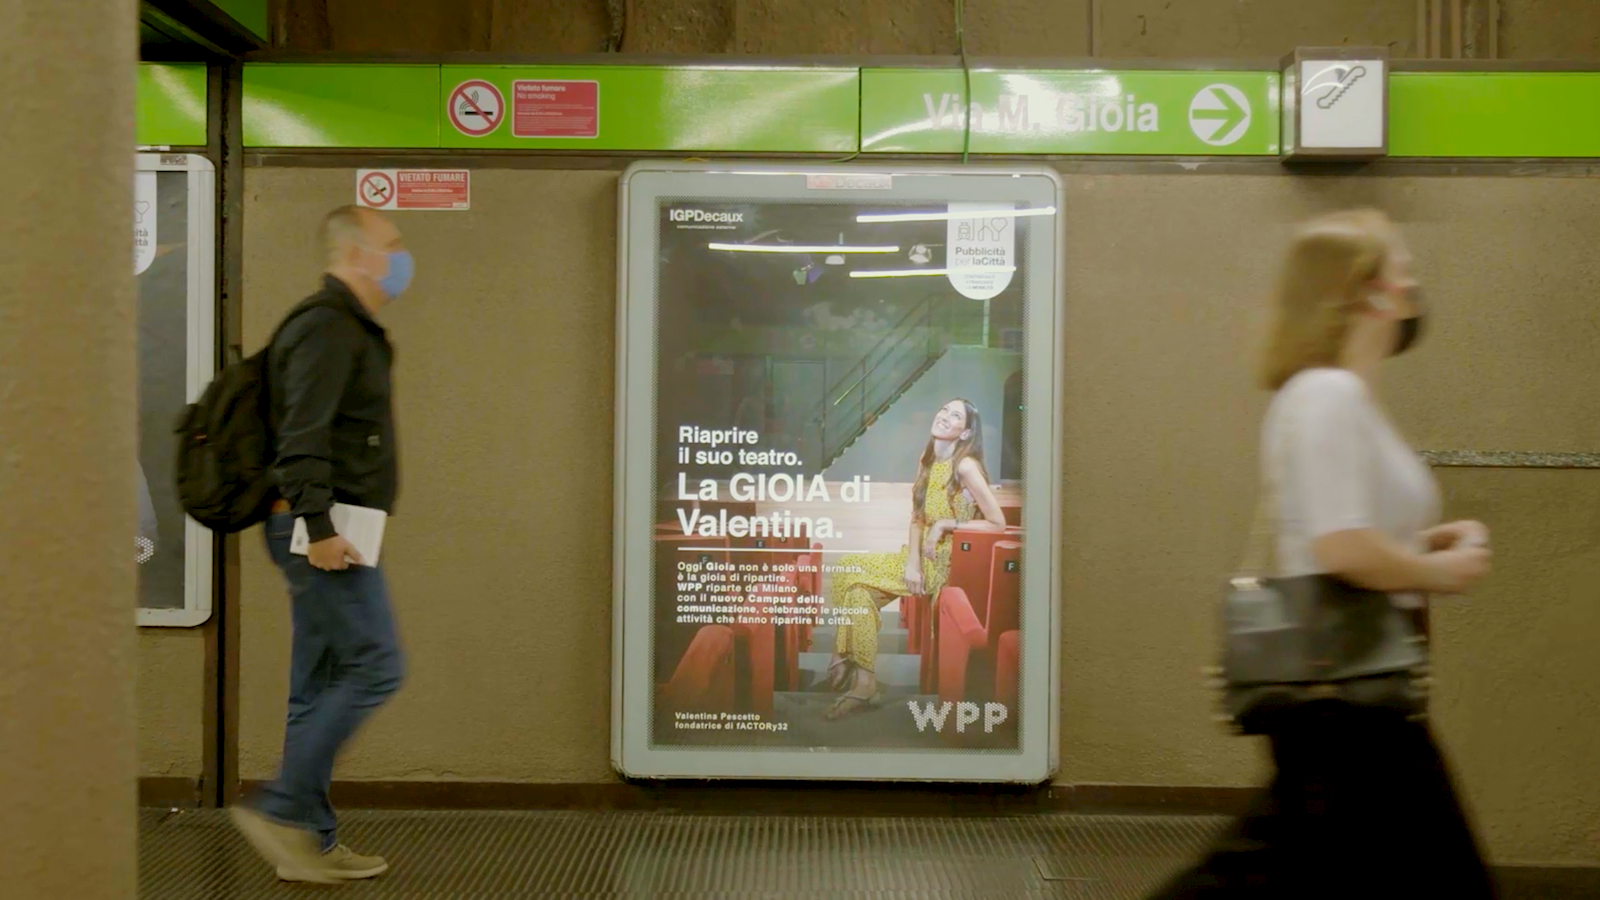 People walking past a poster for WPP's Gioia campaign in a busy metro station